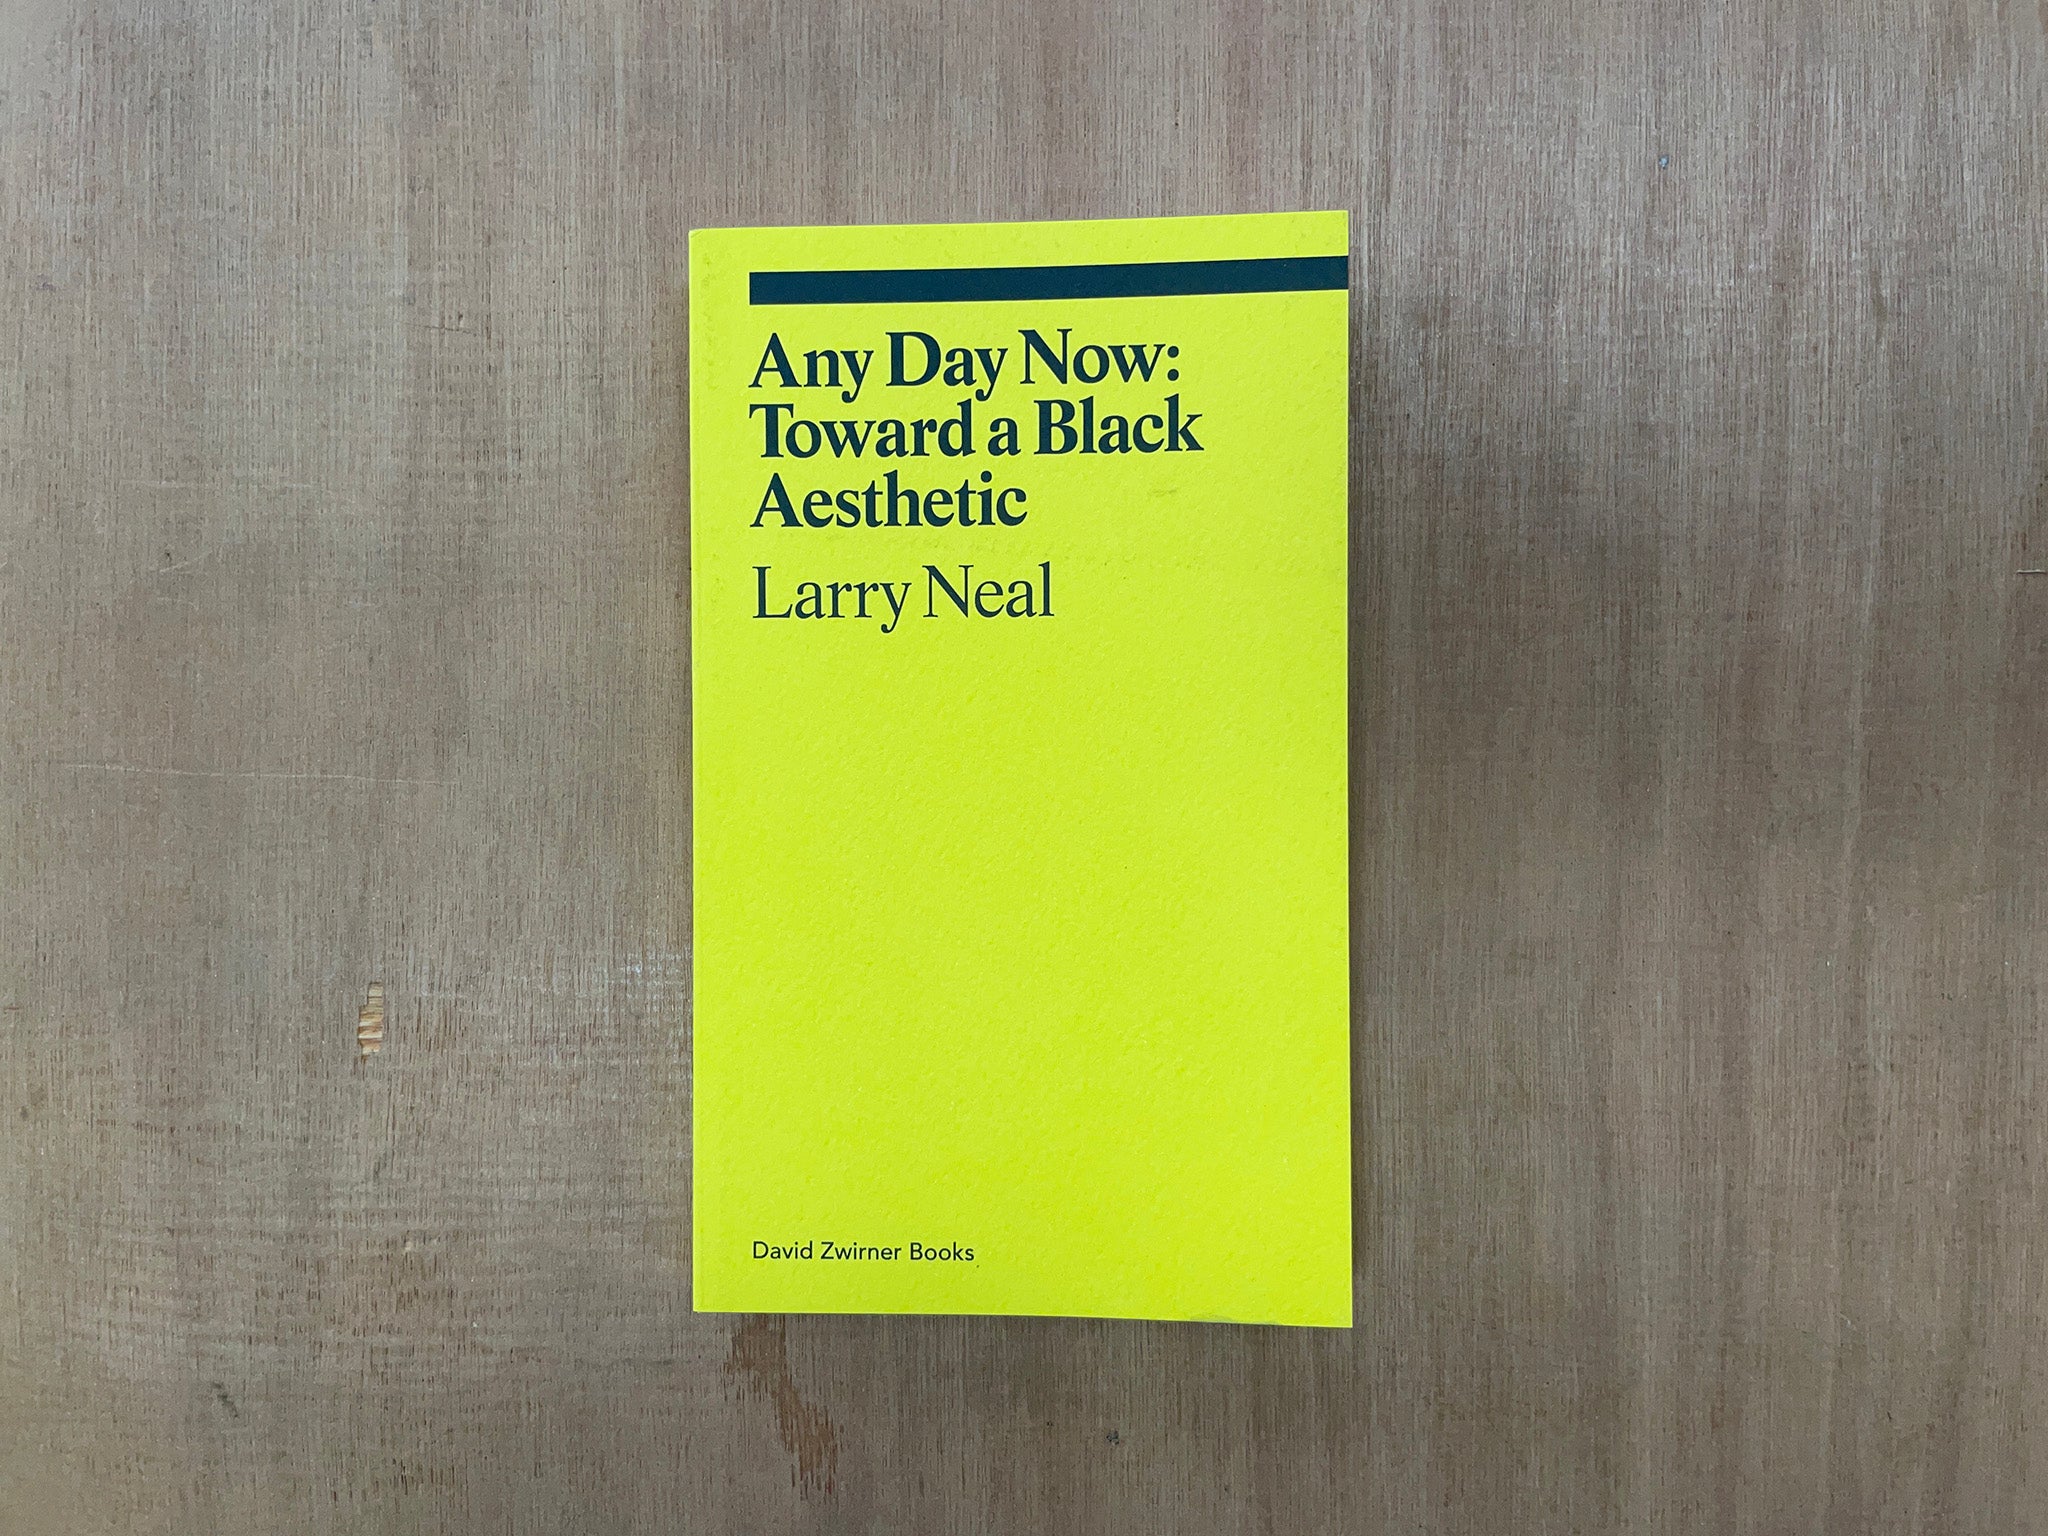 ANY DAY NOW: TOWARD A BLACK AESTHETIC by Larry Neal